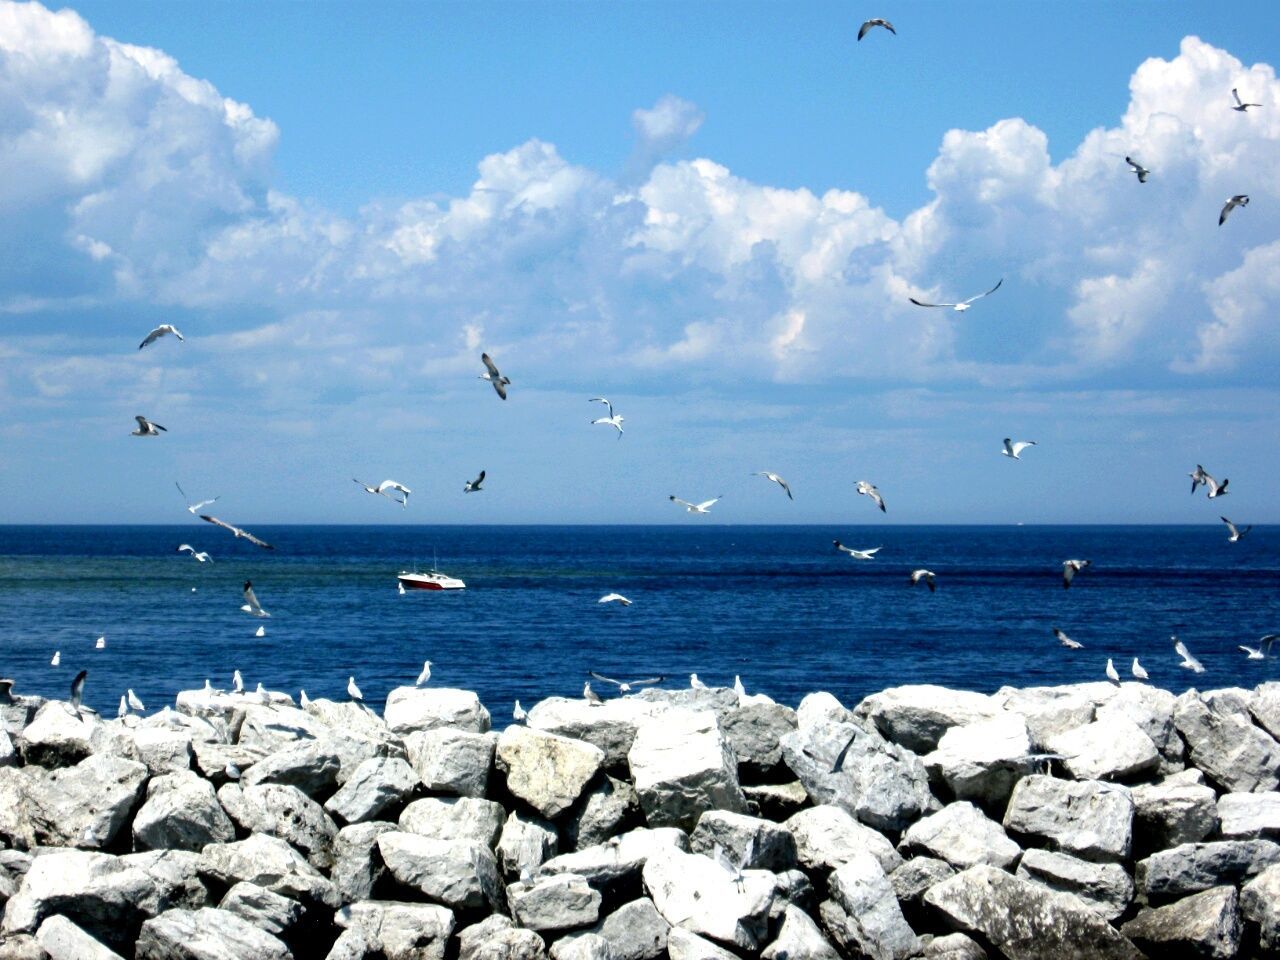 Birds flying over sea with groyne in foreground